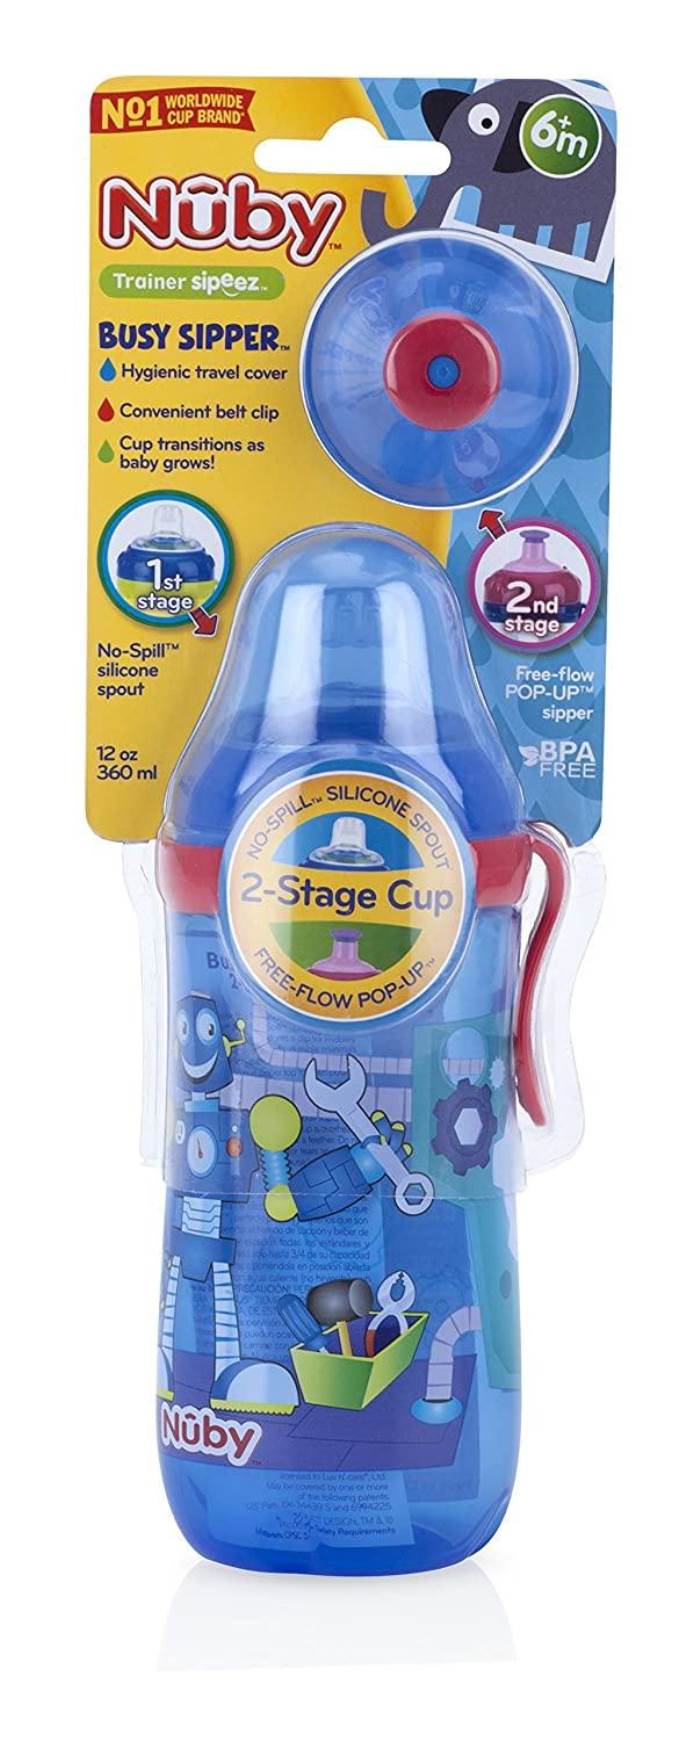 Nuby Busy BPA Free Silicone Spout Sipper with Flow Pop Up and Cover without Spout, 12Oz/360ml (Colours May Vary)